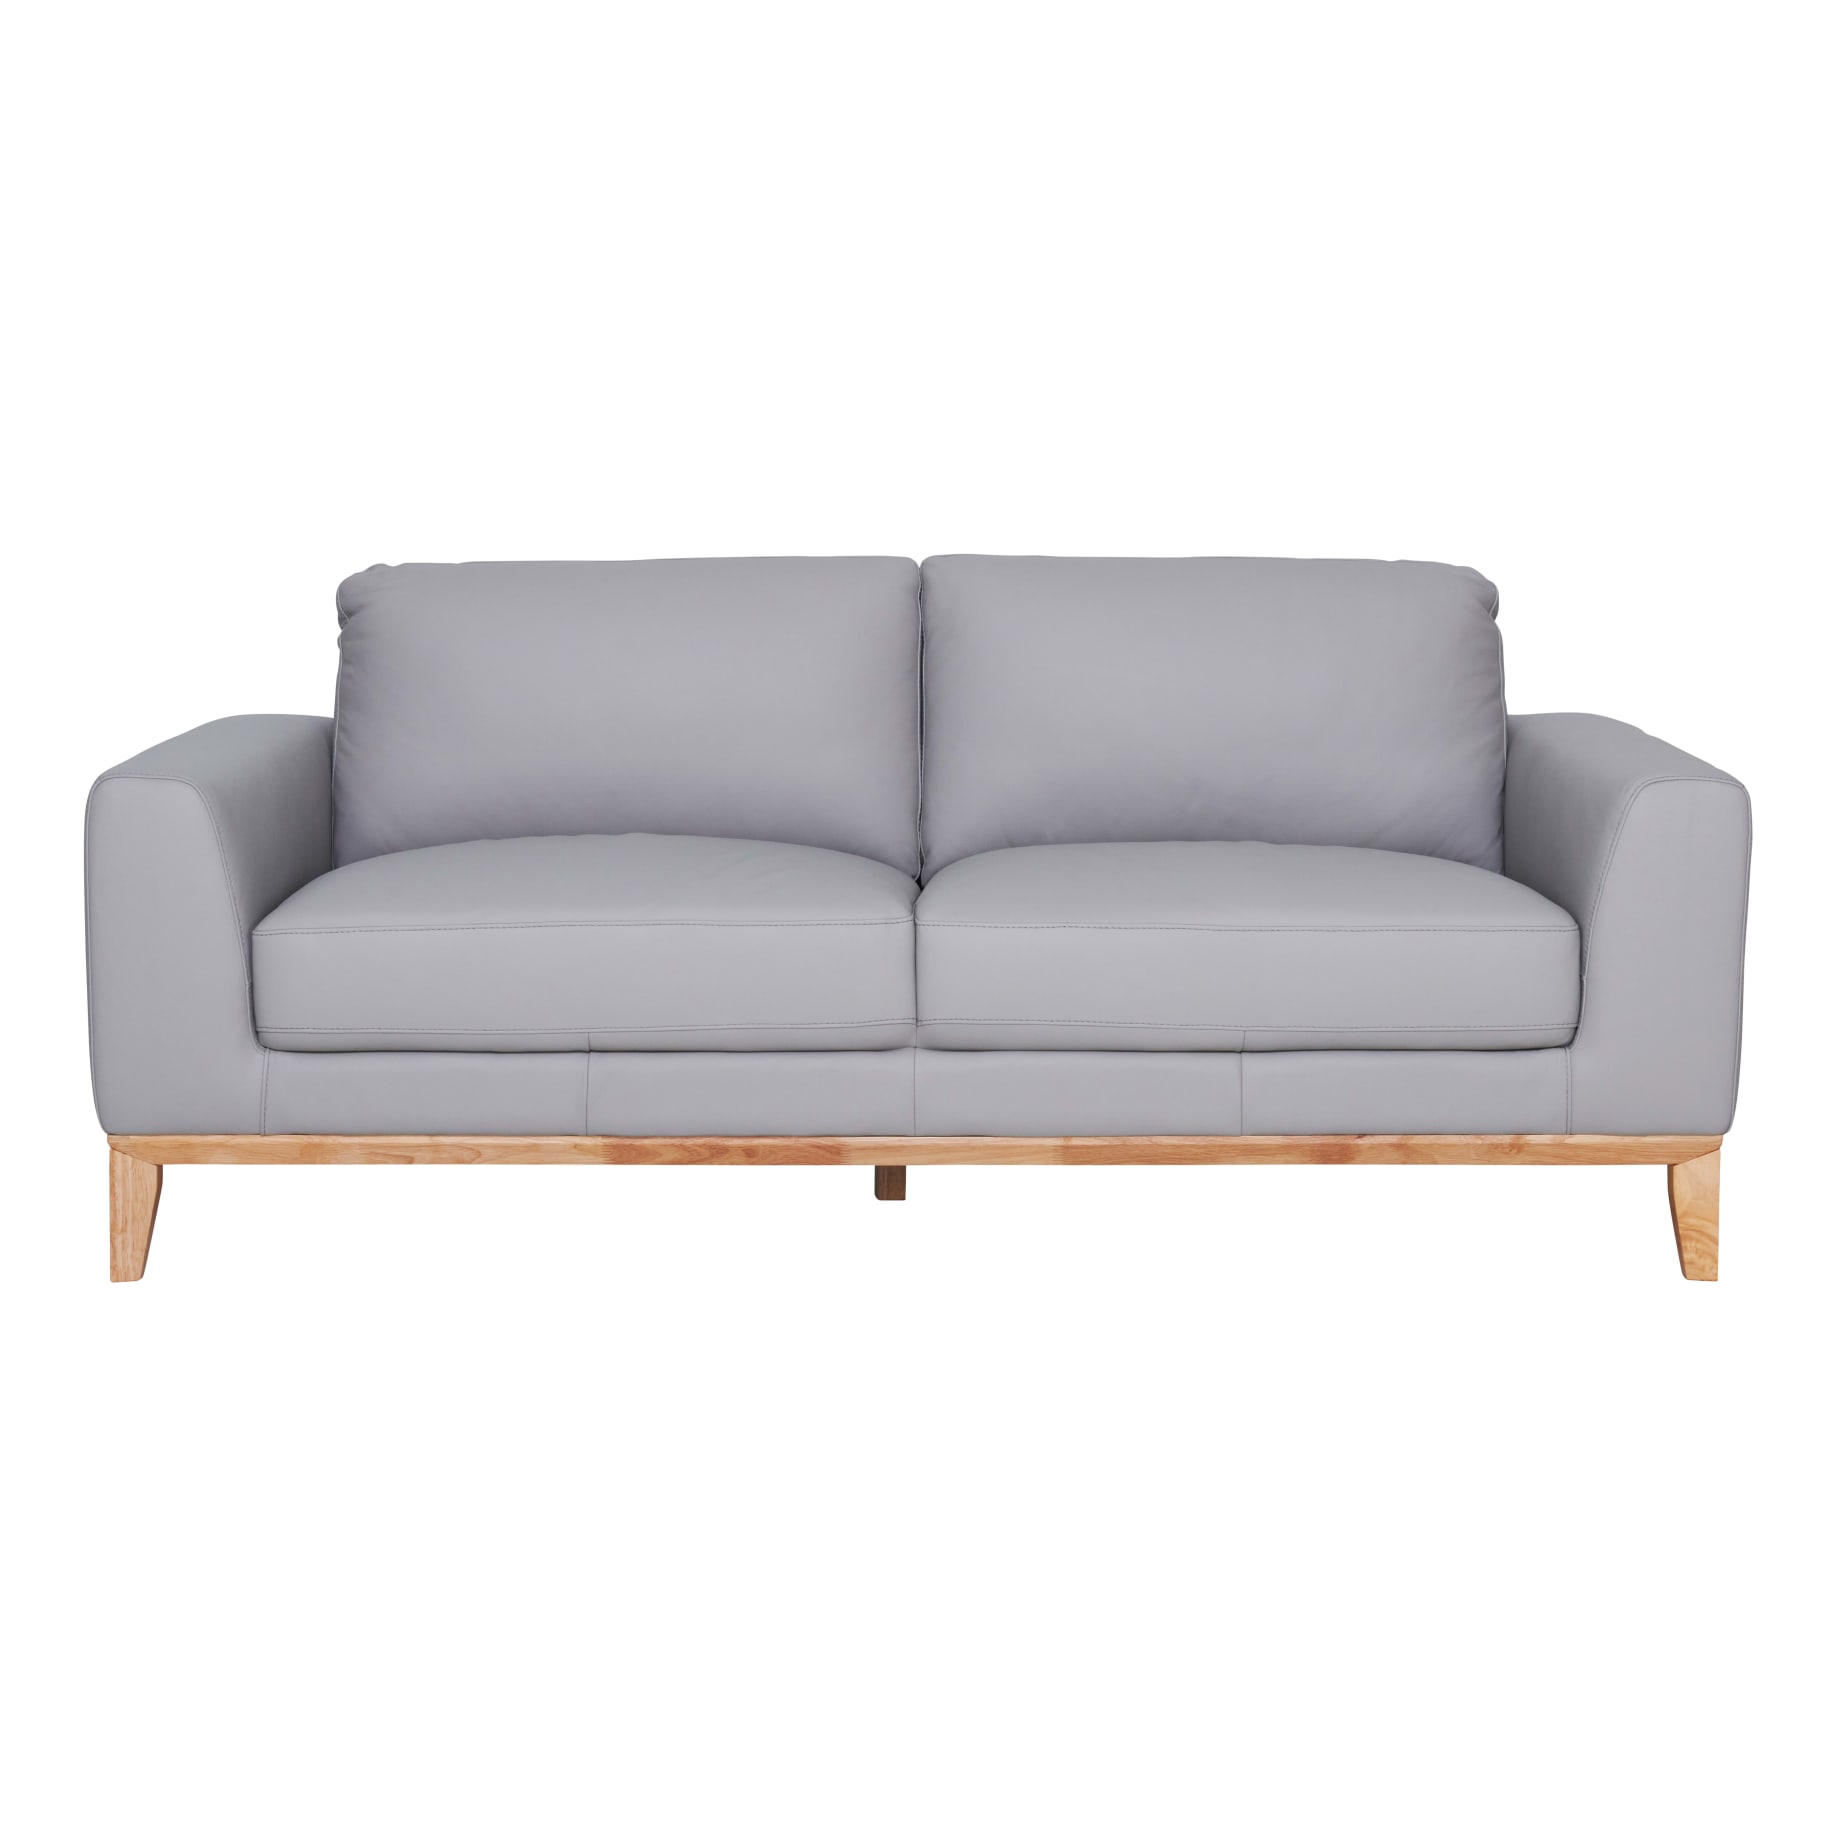 Dante 3 Seater Sofa in Leather Pewter